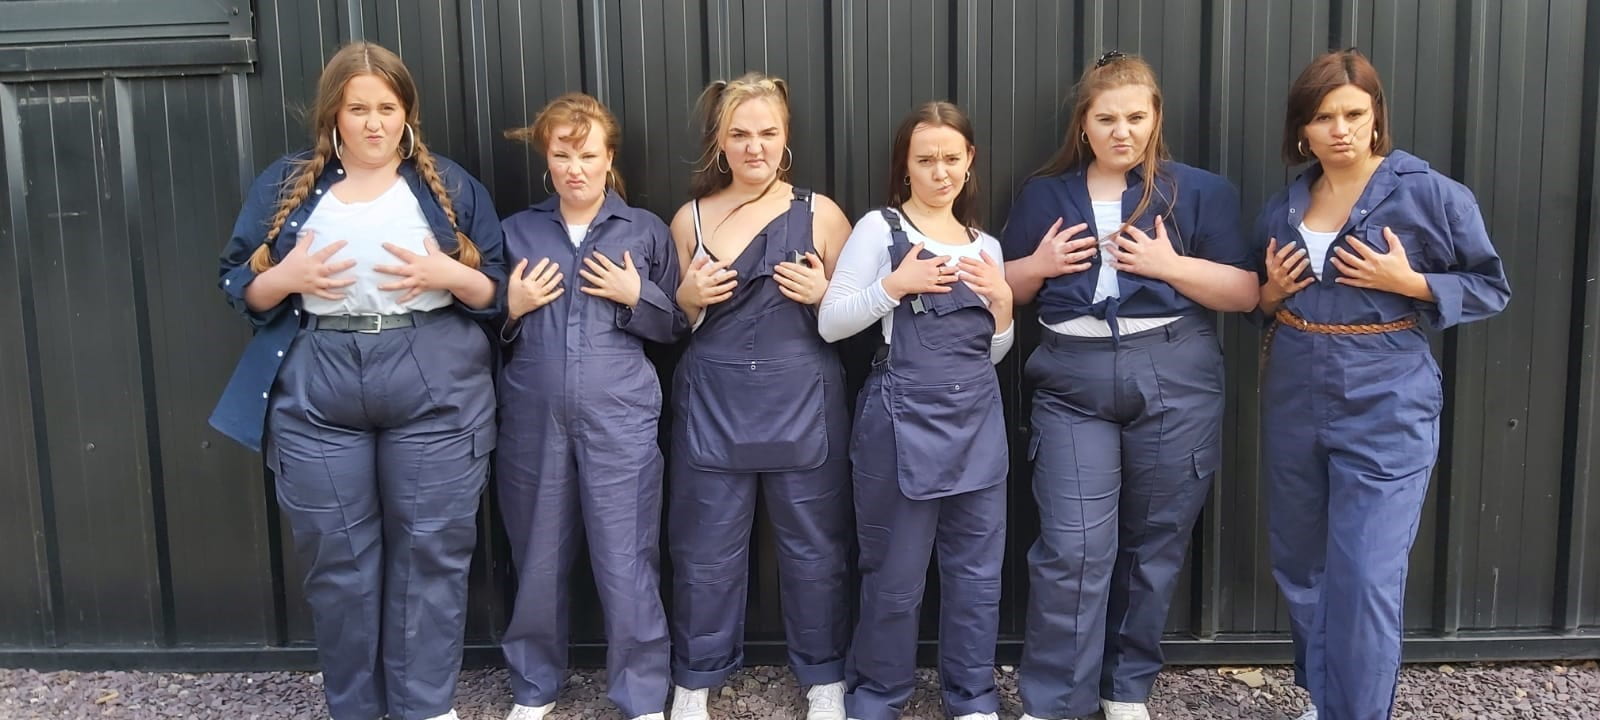 Image contains six women all holding their chest, with a scowl on their faces. All dressed in men's workwear.